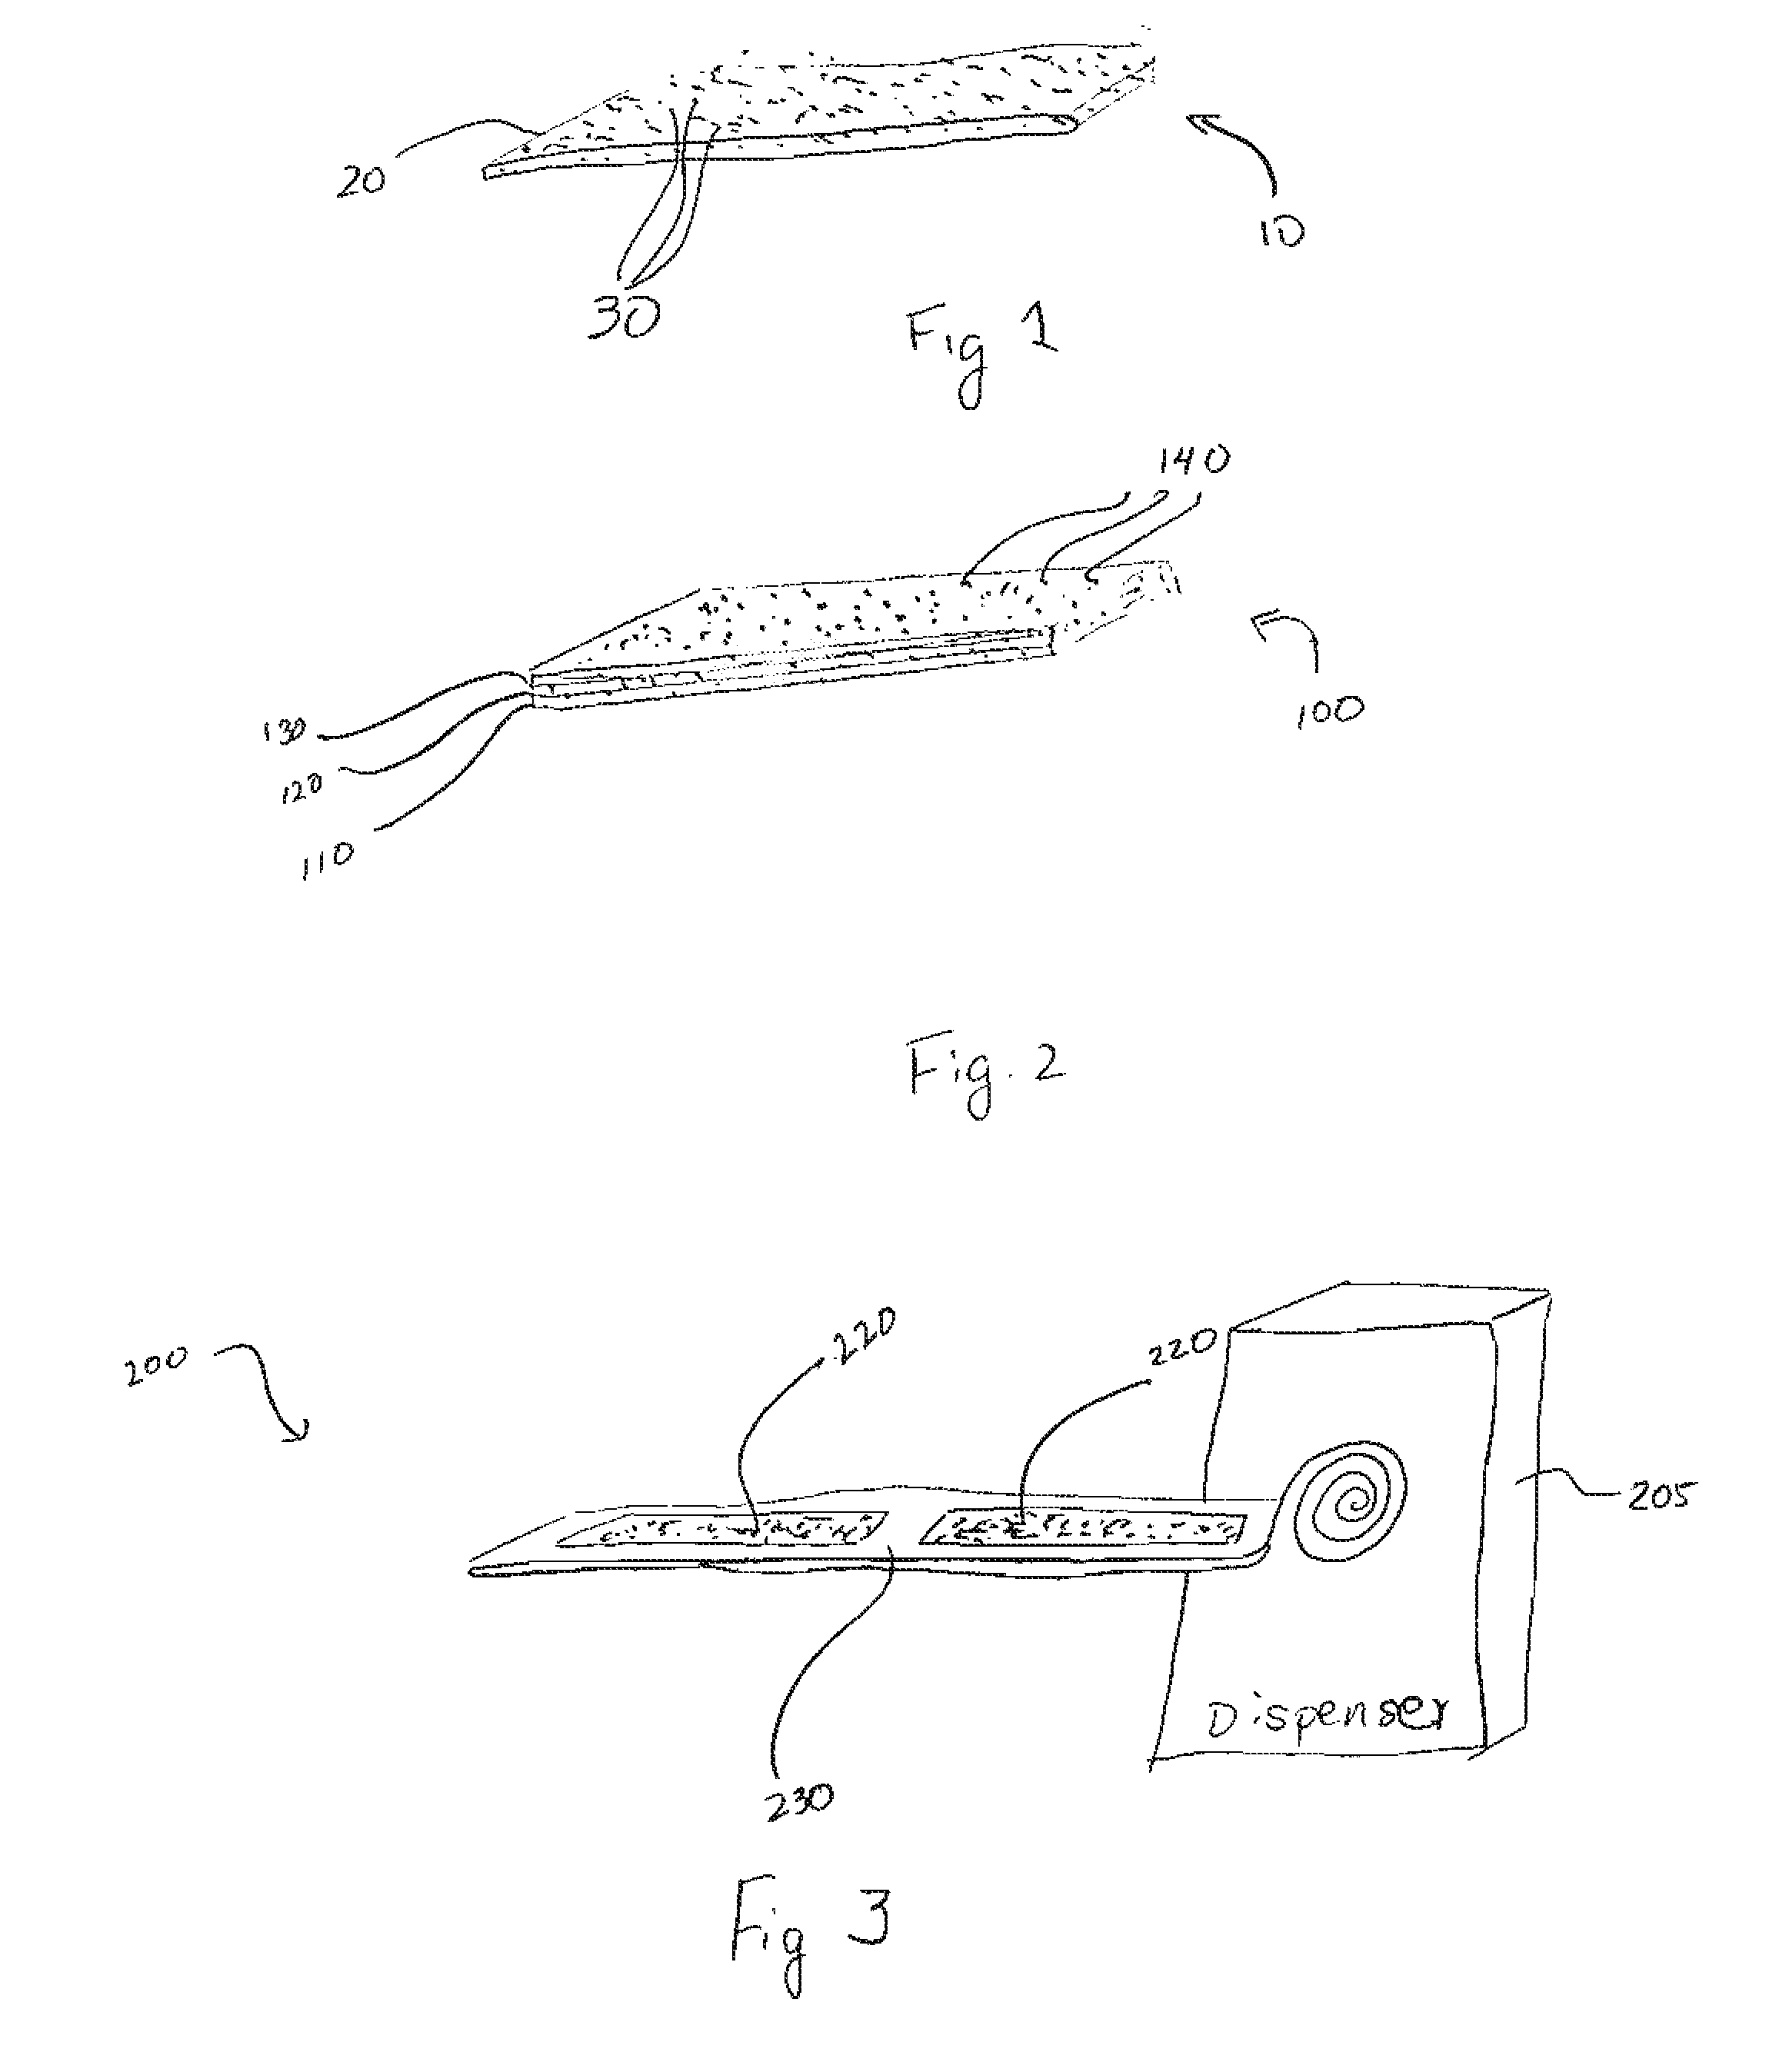 Dissolvable dietary supplement strip and methods for using the same